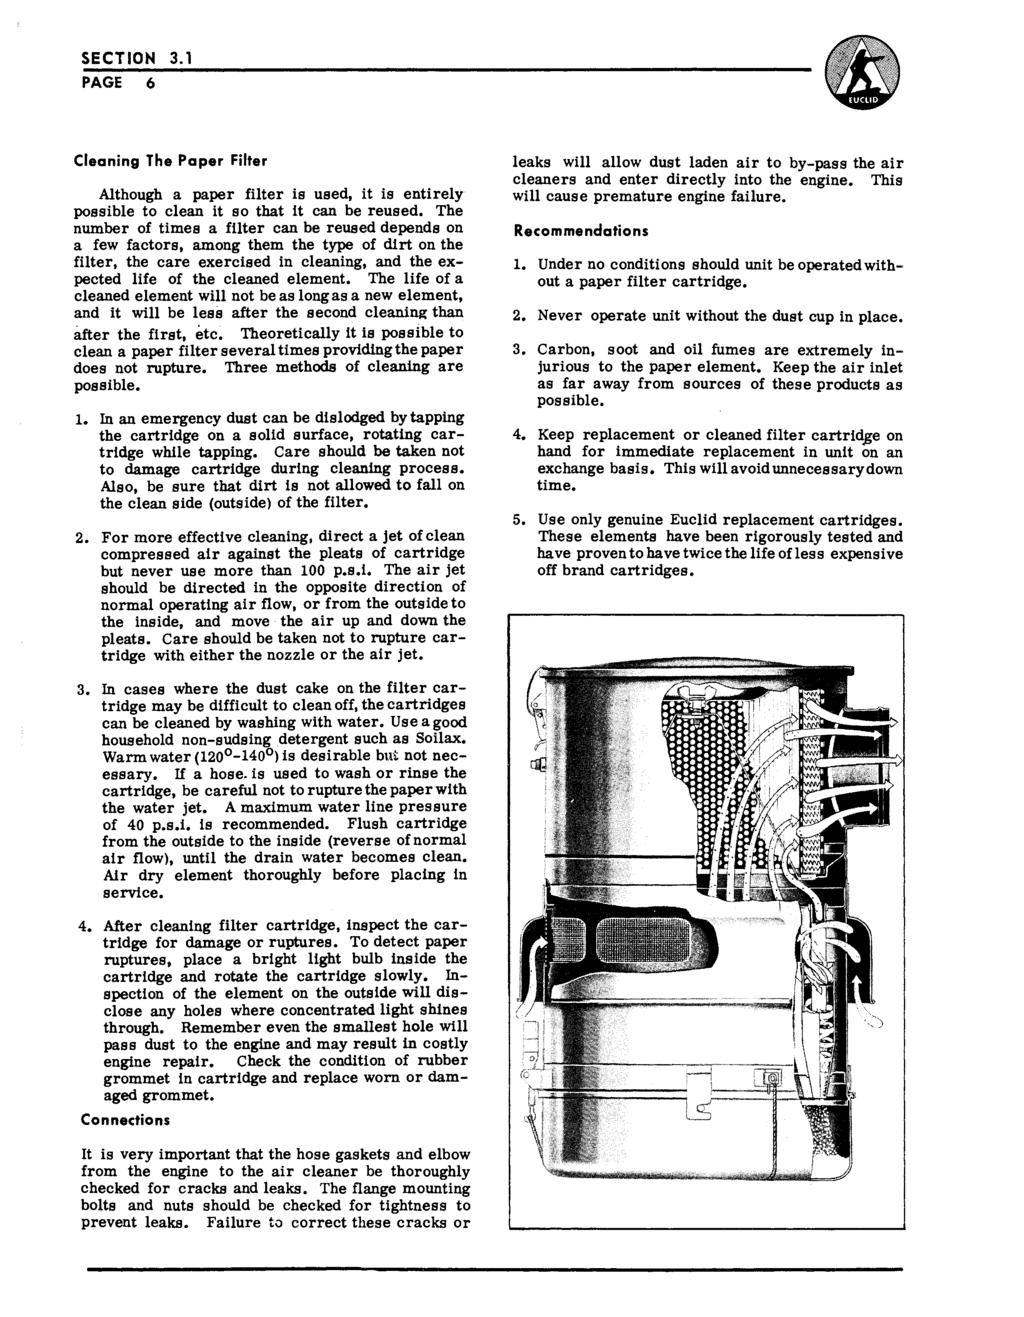 SECTION 3.1 PAGE 6 Cleaning The Paper Filter Although a paper filter is used, it is entirely possible to clean it so that it can be reused.